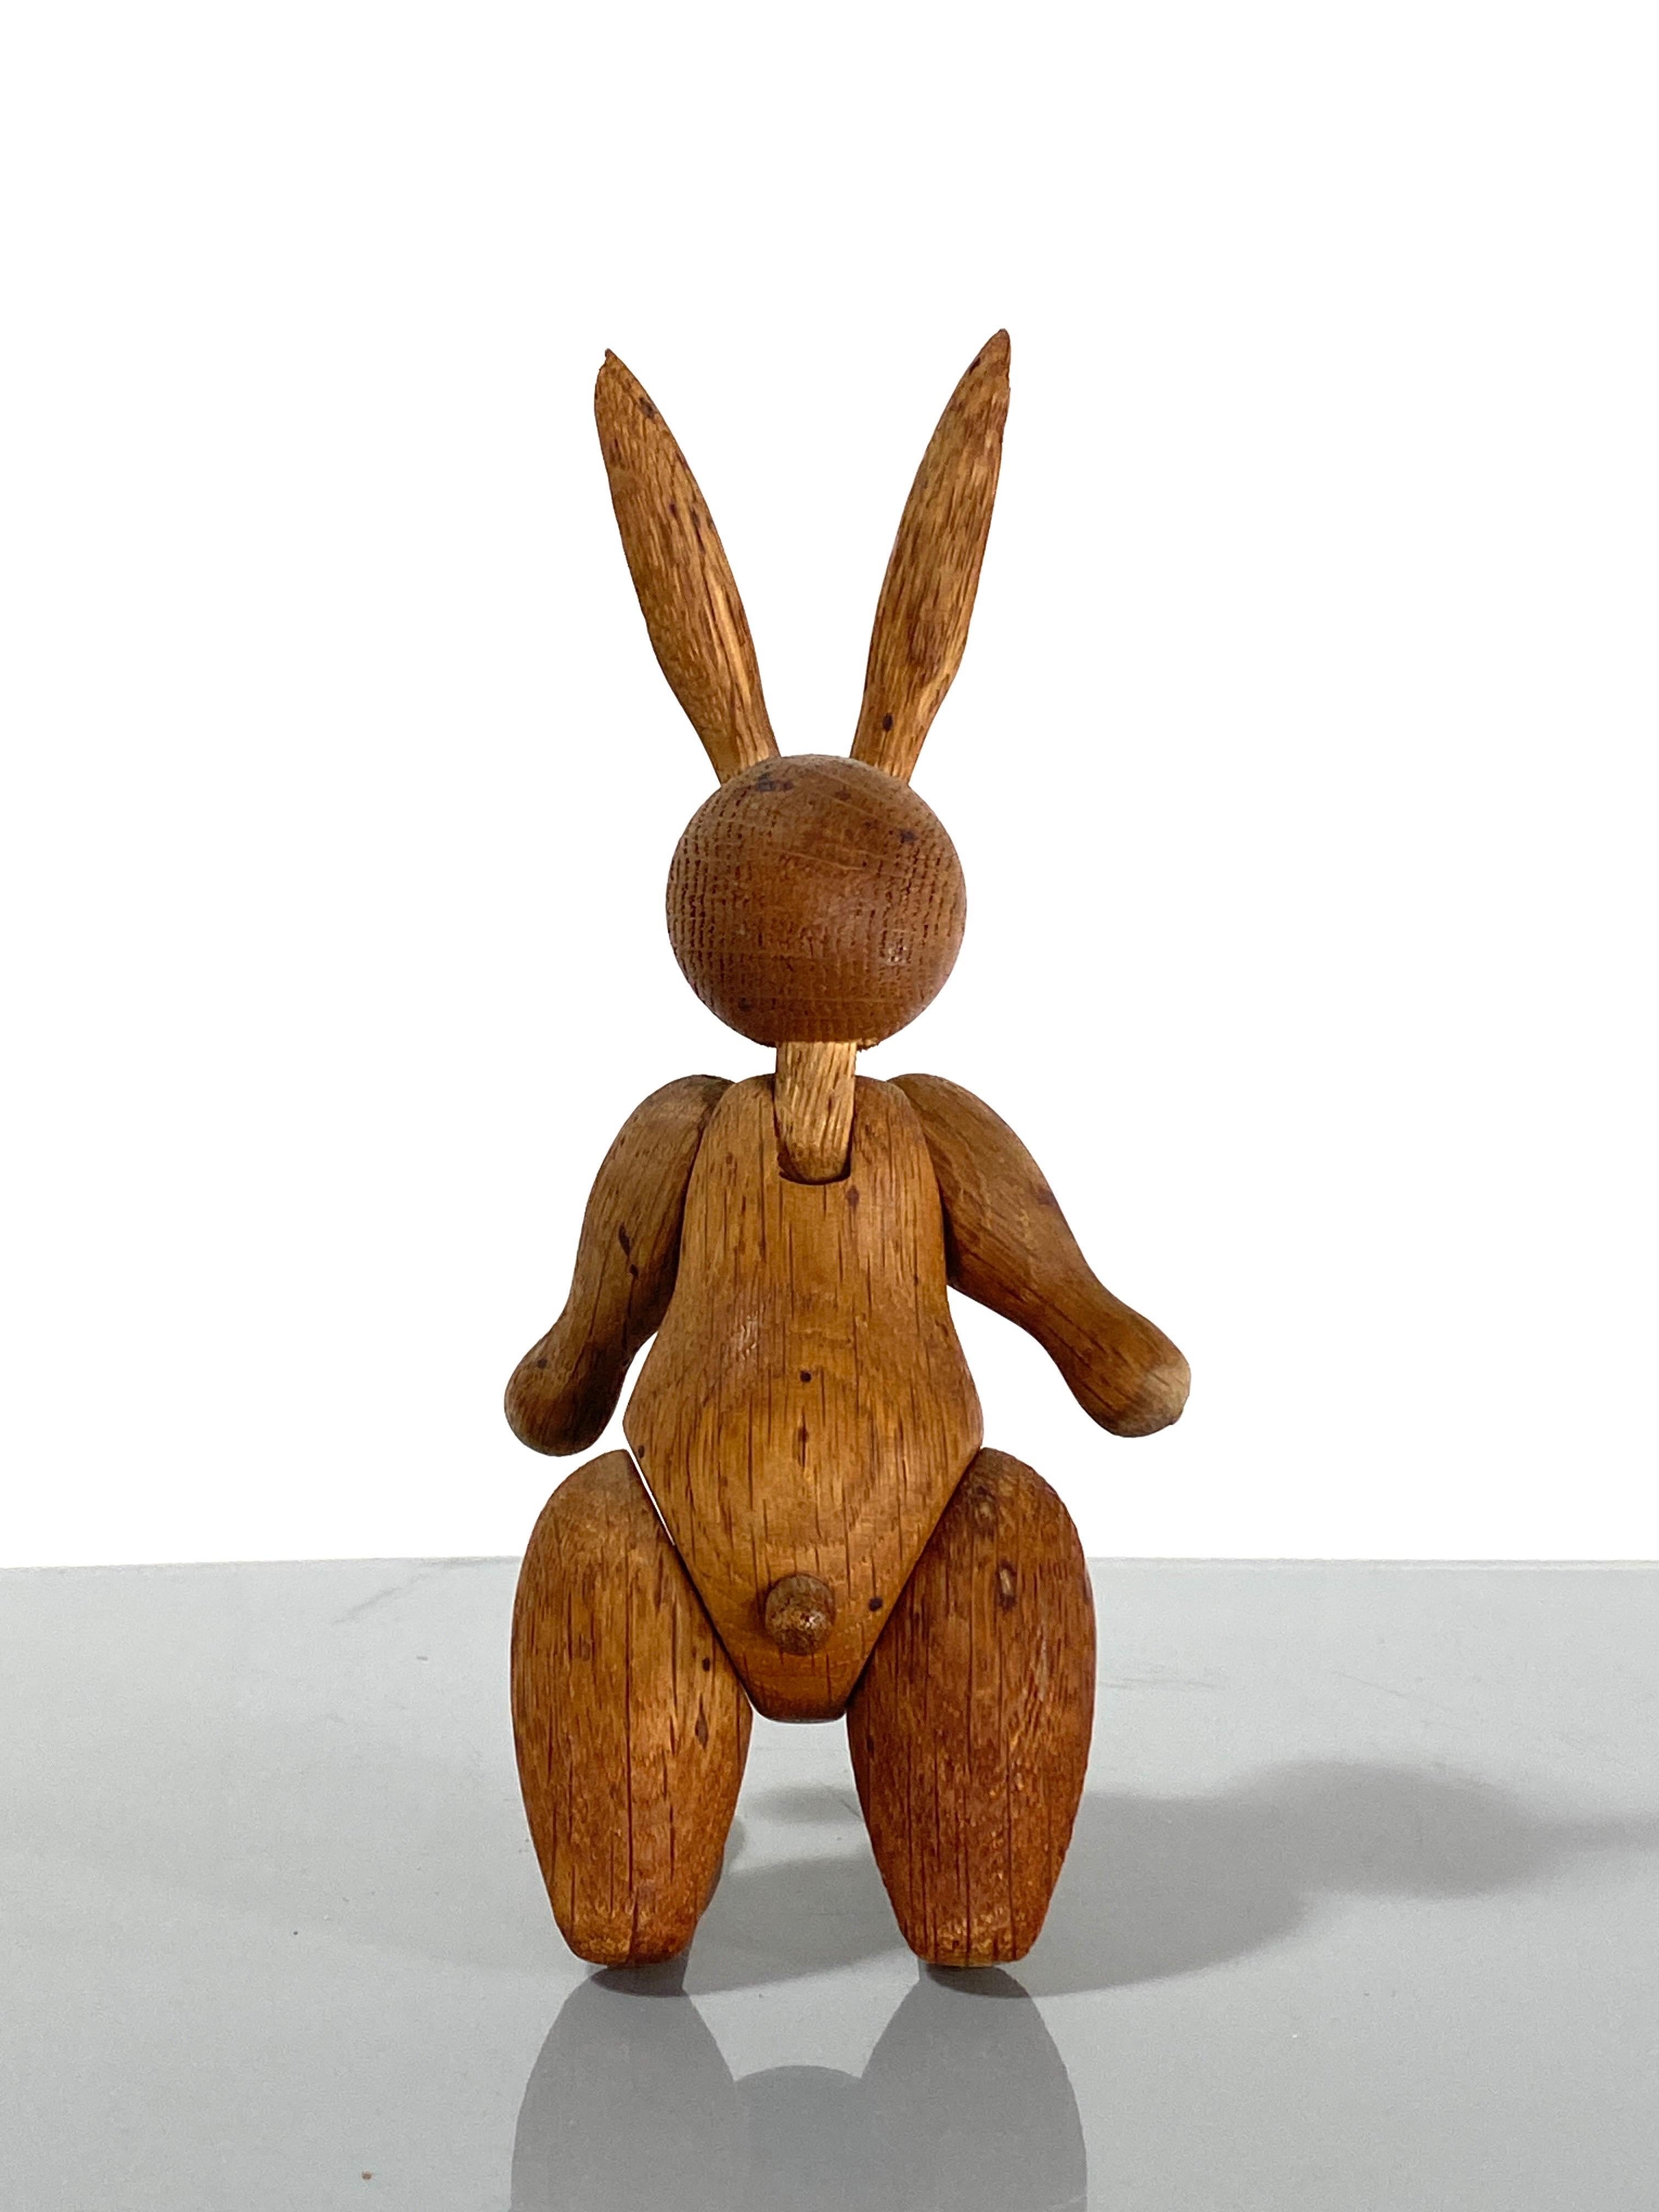 Vintage Rabbit Figurine by Kay Bojesen, It Was Designed in 1957, This is an Exam 5